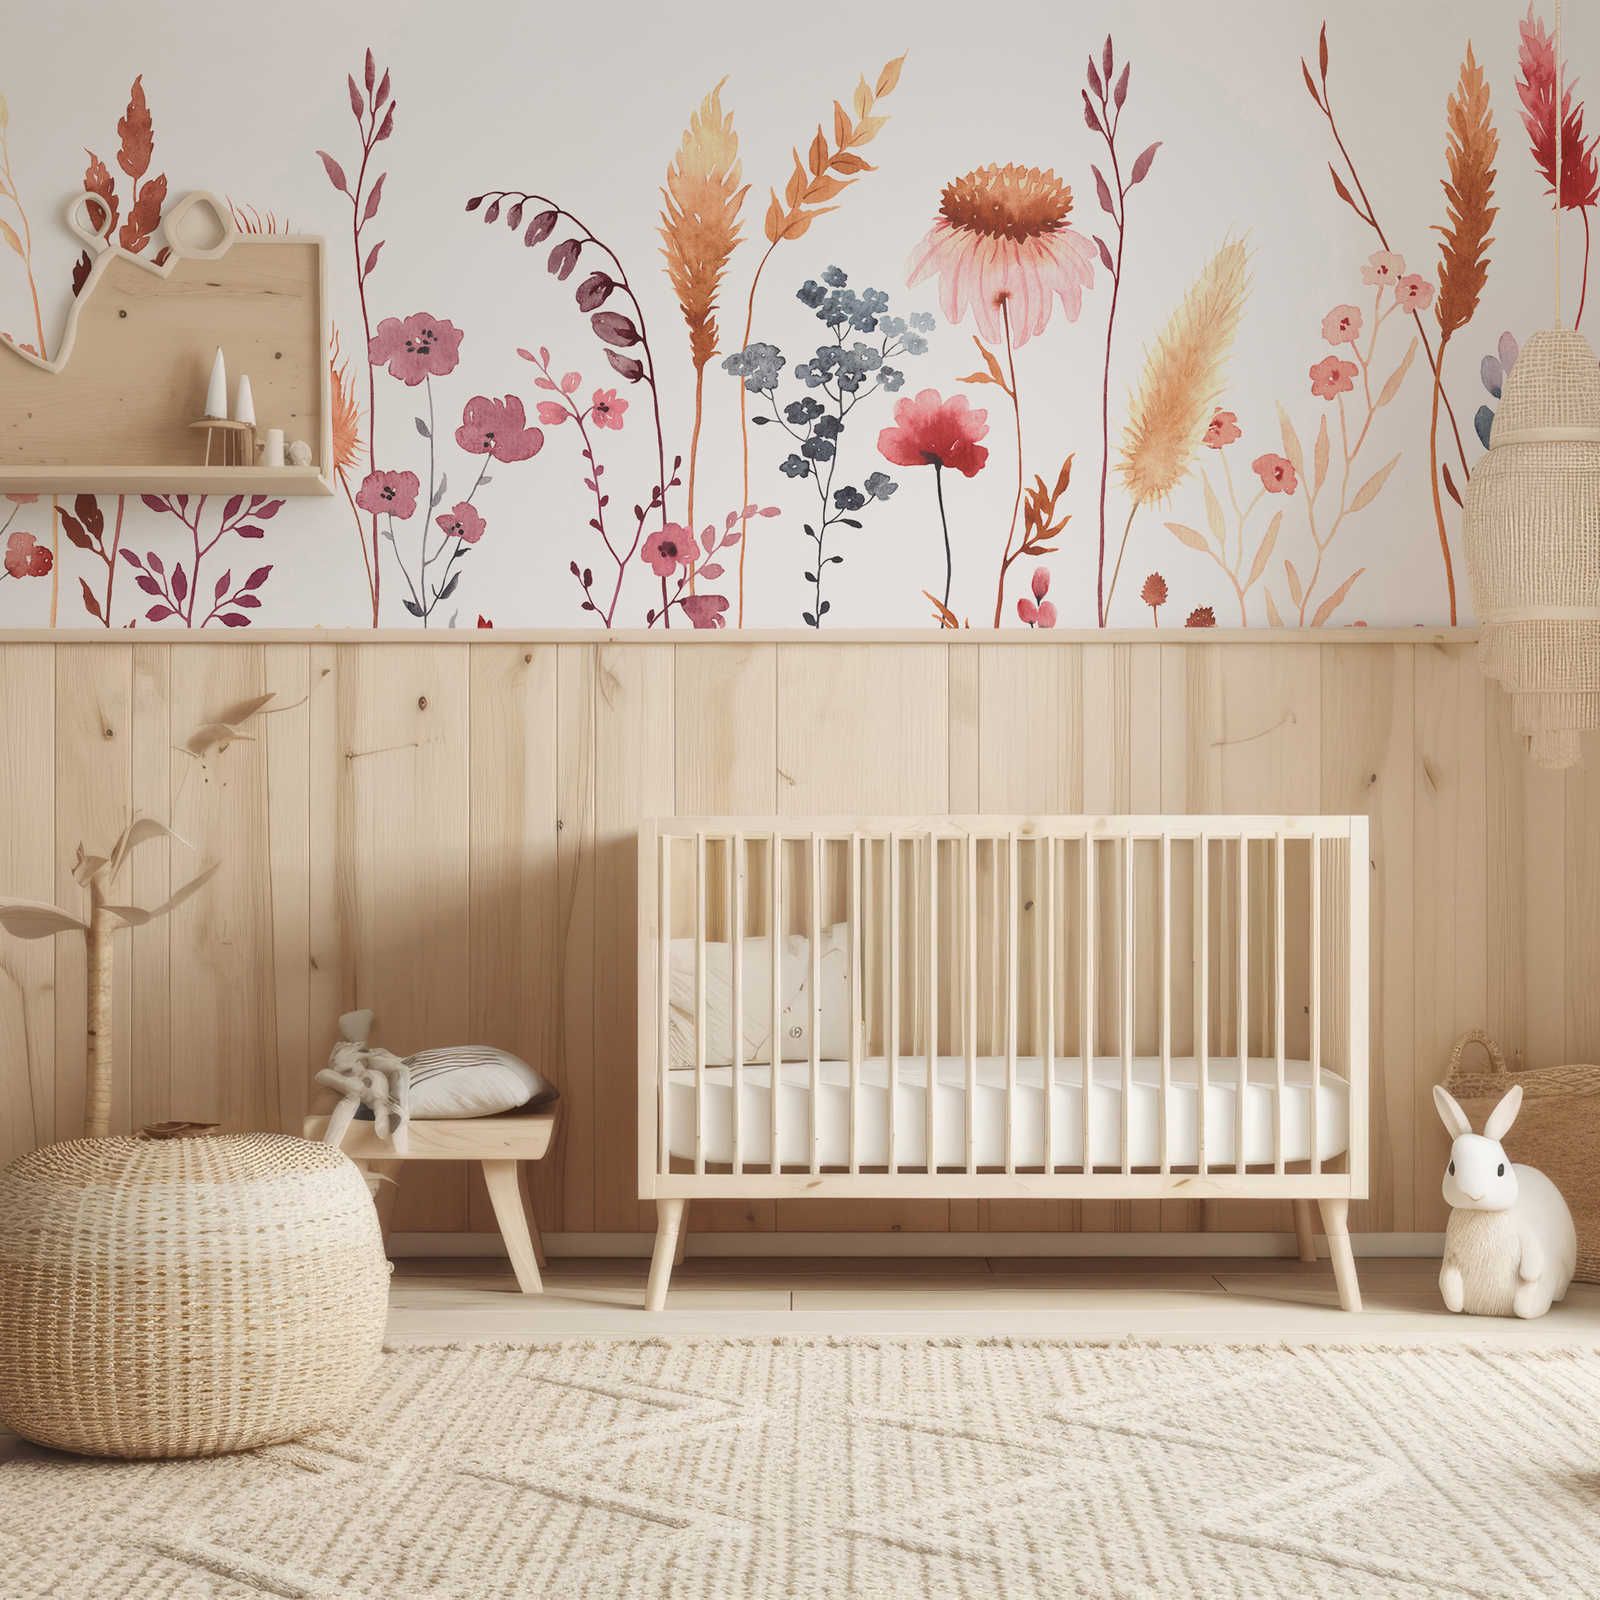 Photo wallpaper for children's room with leaves and grasses - Smooth & matt non-woven
